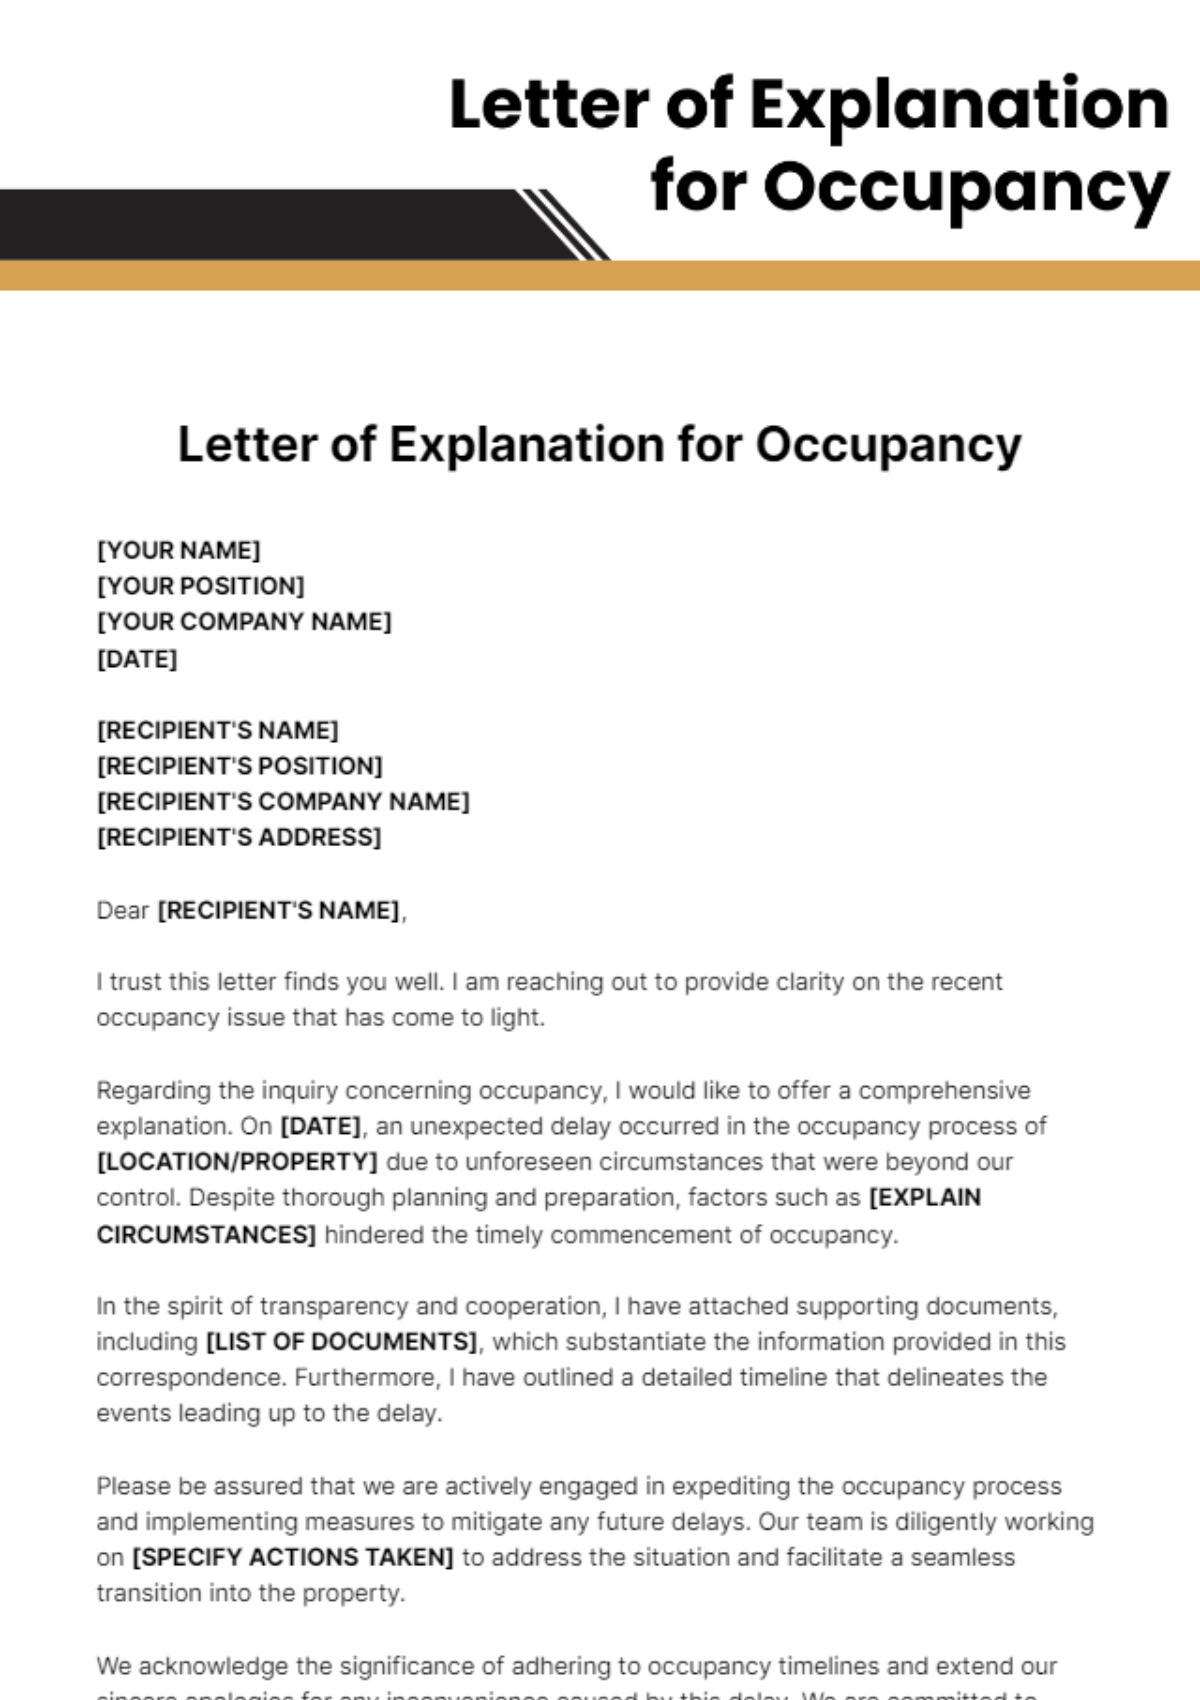 Letter Of Explanation For Occupancy Template